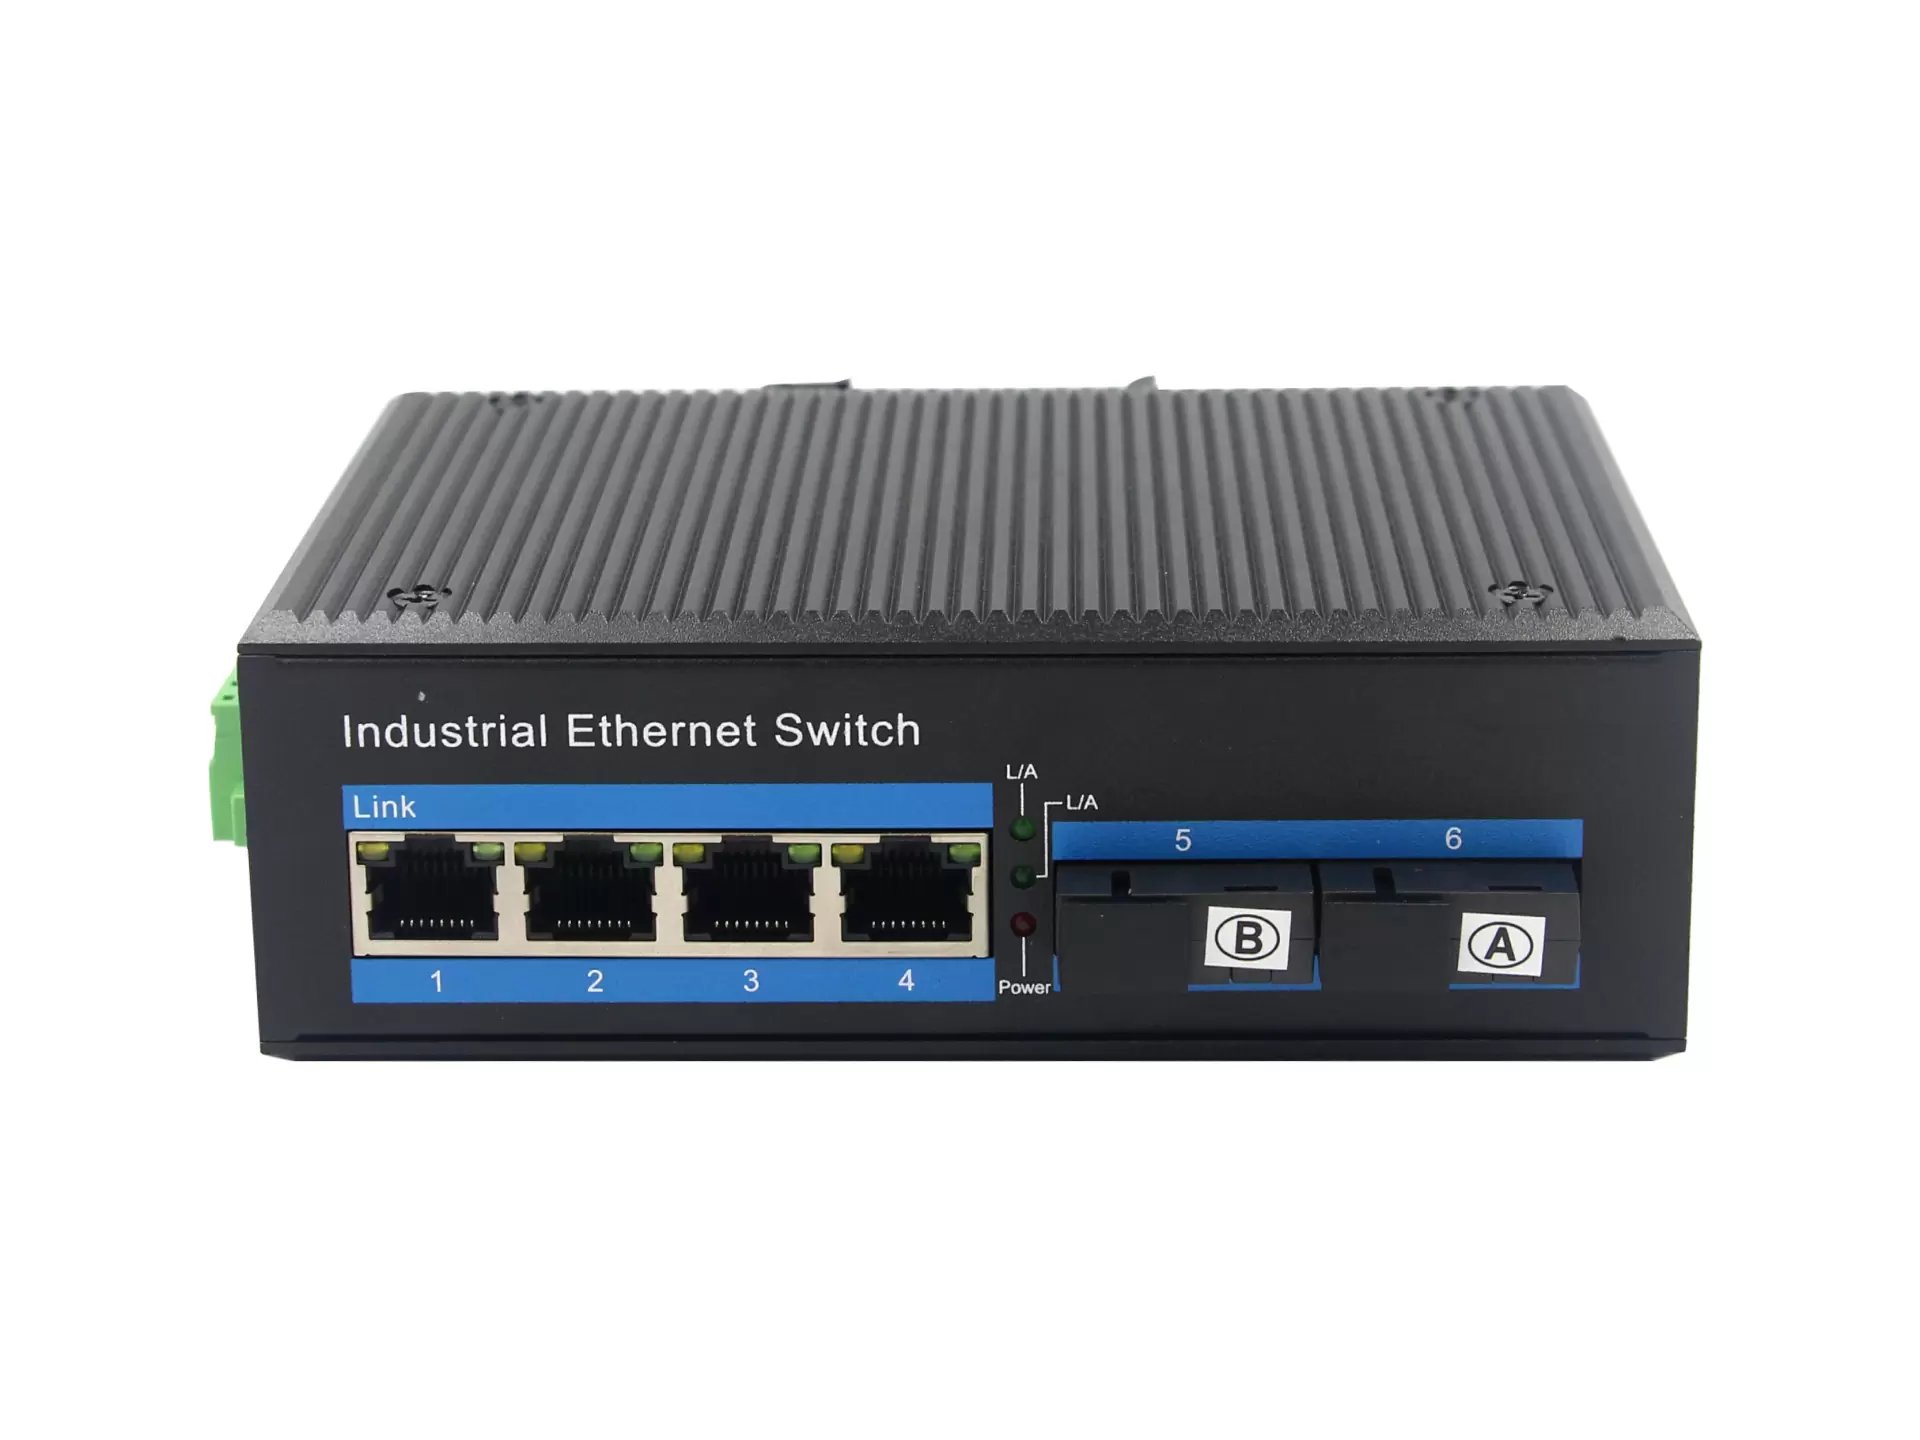 How Do 4-Port Ethernet Switches Compare to Other Network Switch Options?